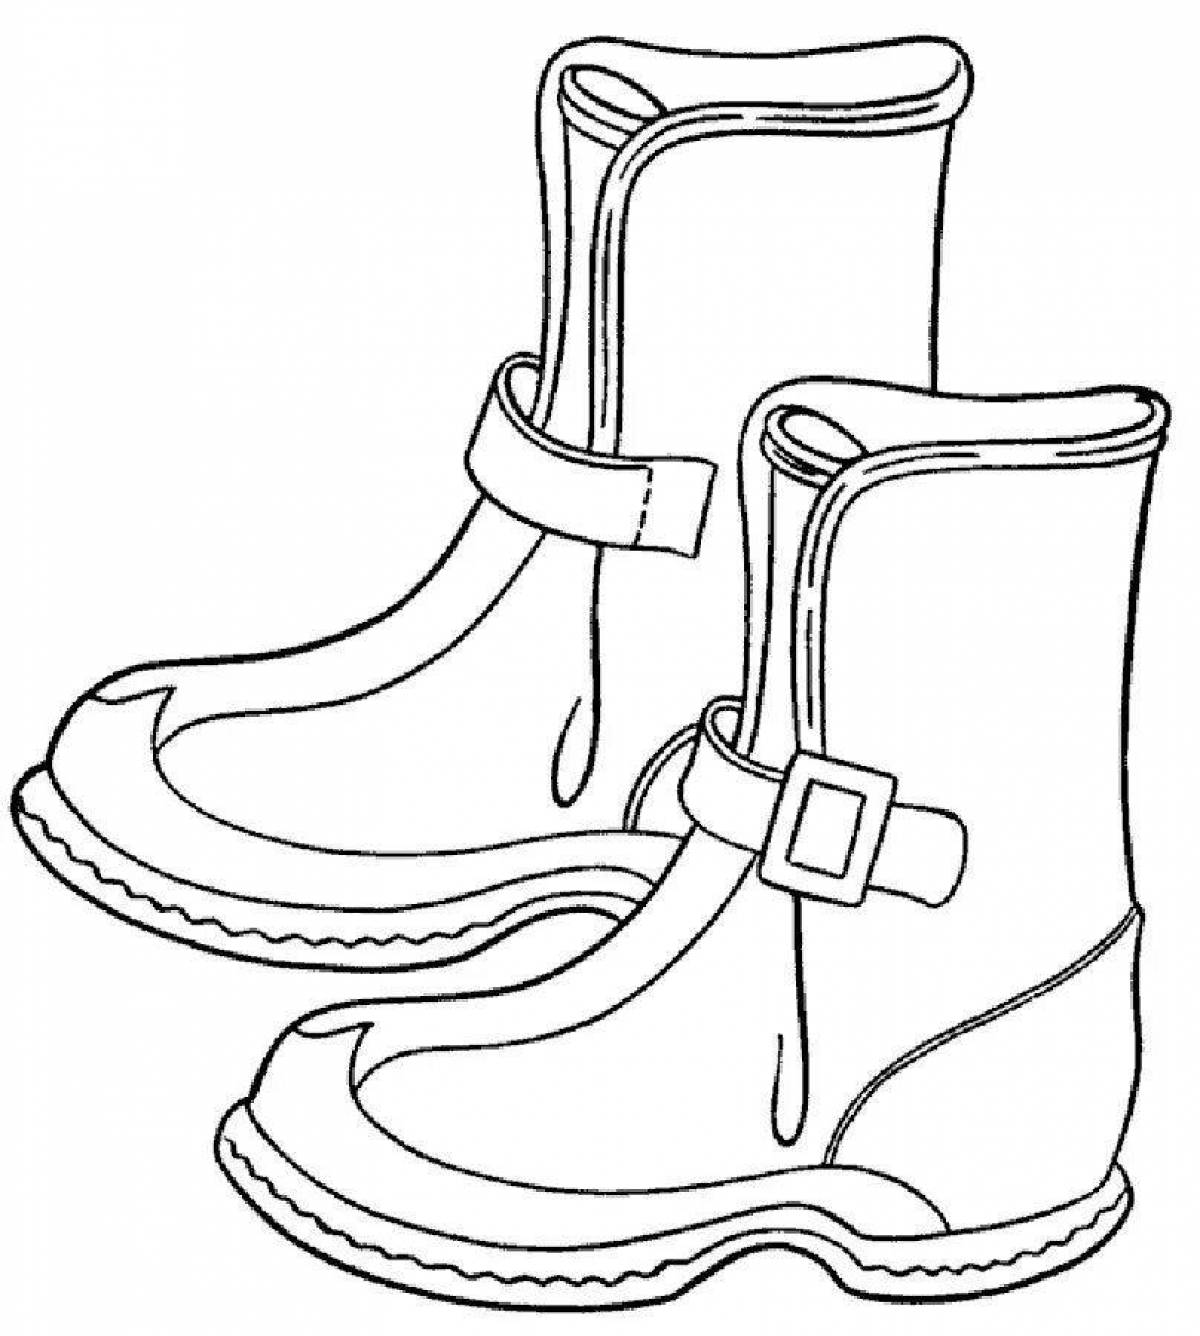 Coloring book shiny winter shoes